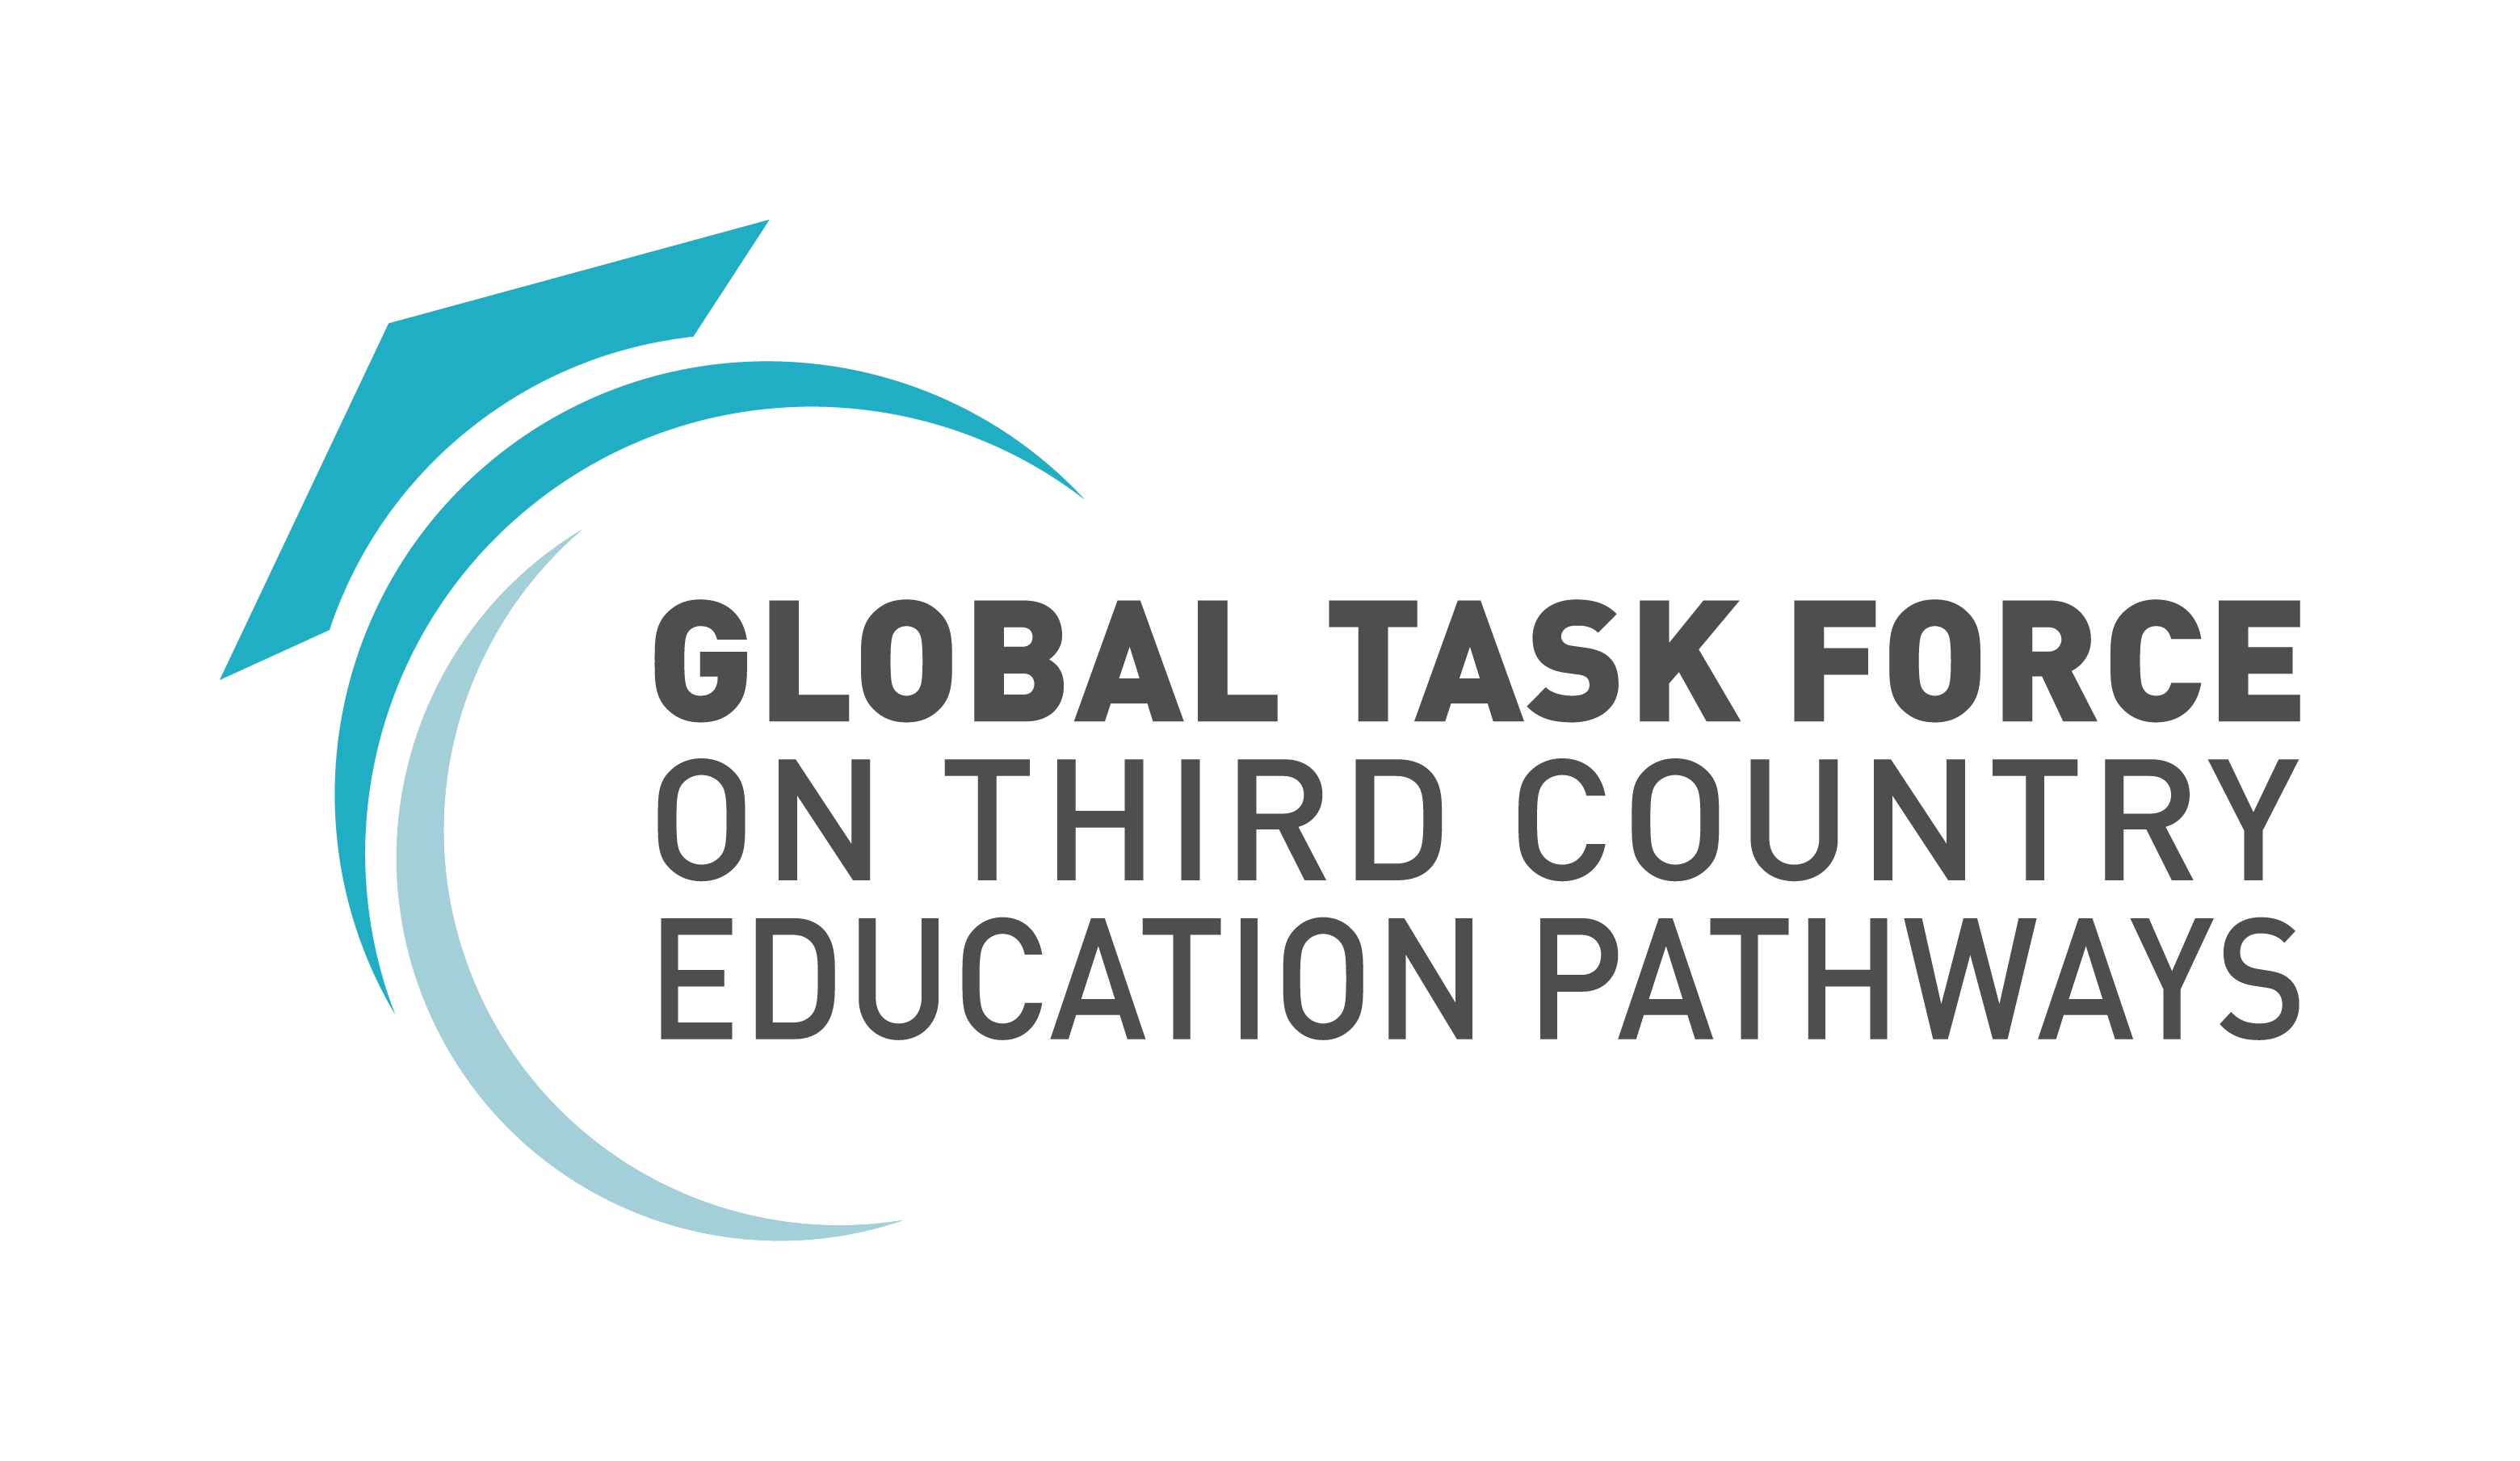 Global Task Force on Third Country Education Pathways